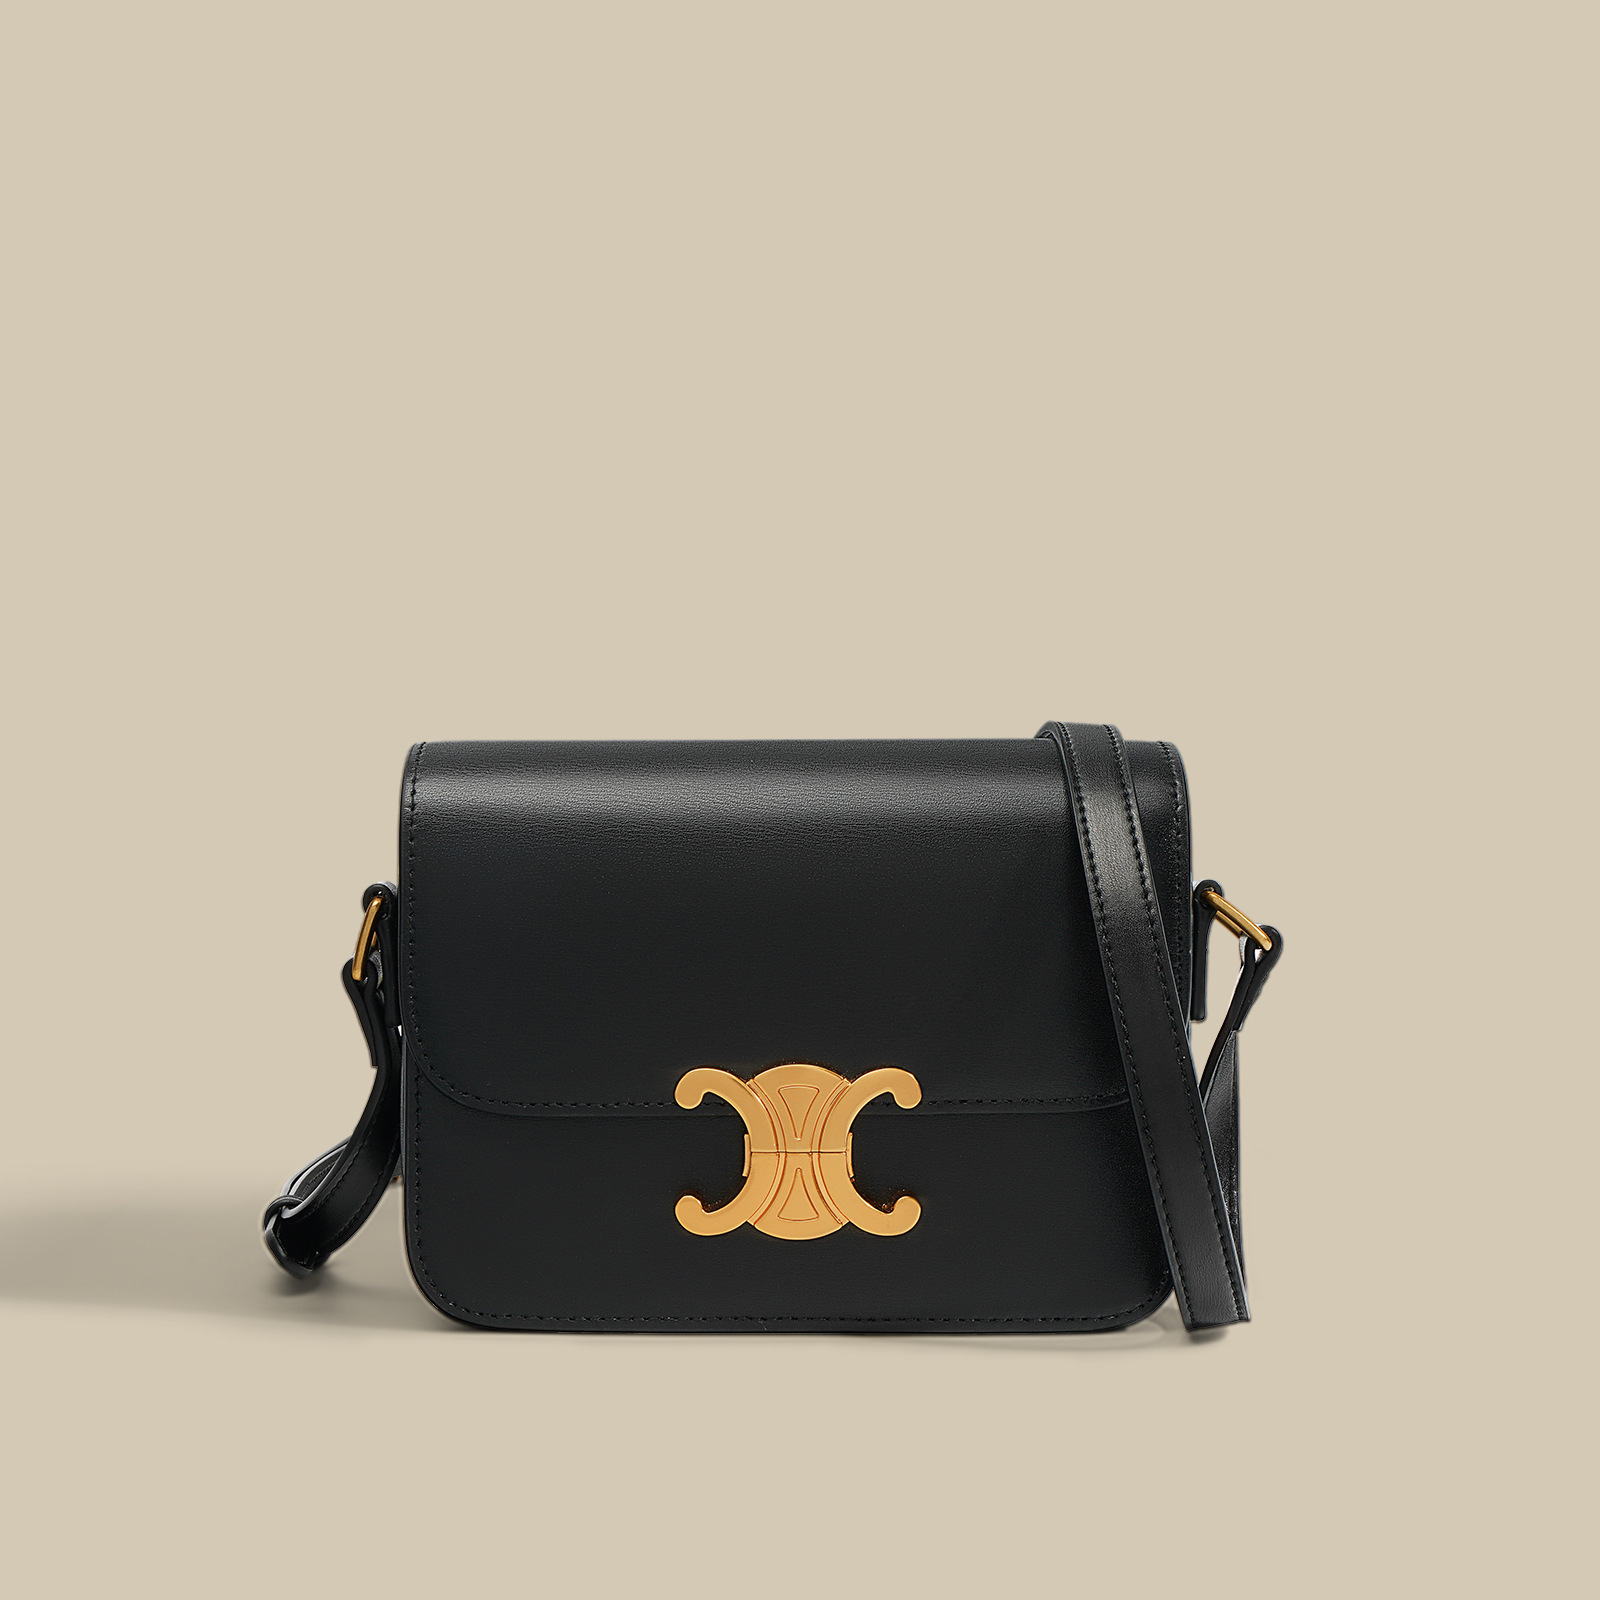 Bold and daring bags that make a statement For the Chic and sophisticated shopper bags Natural strength Genuine Leather Timeless beauty Genuine Leather